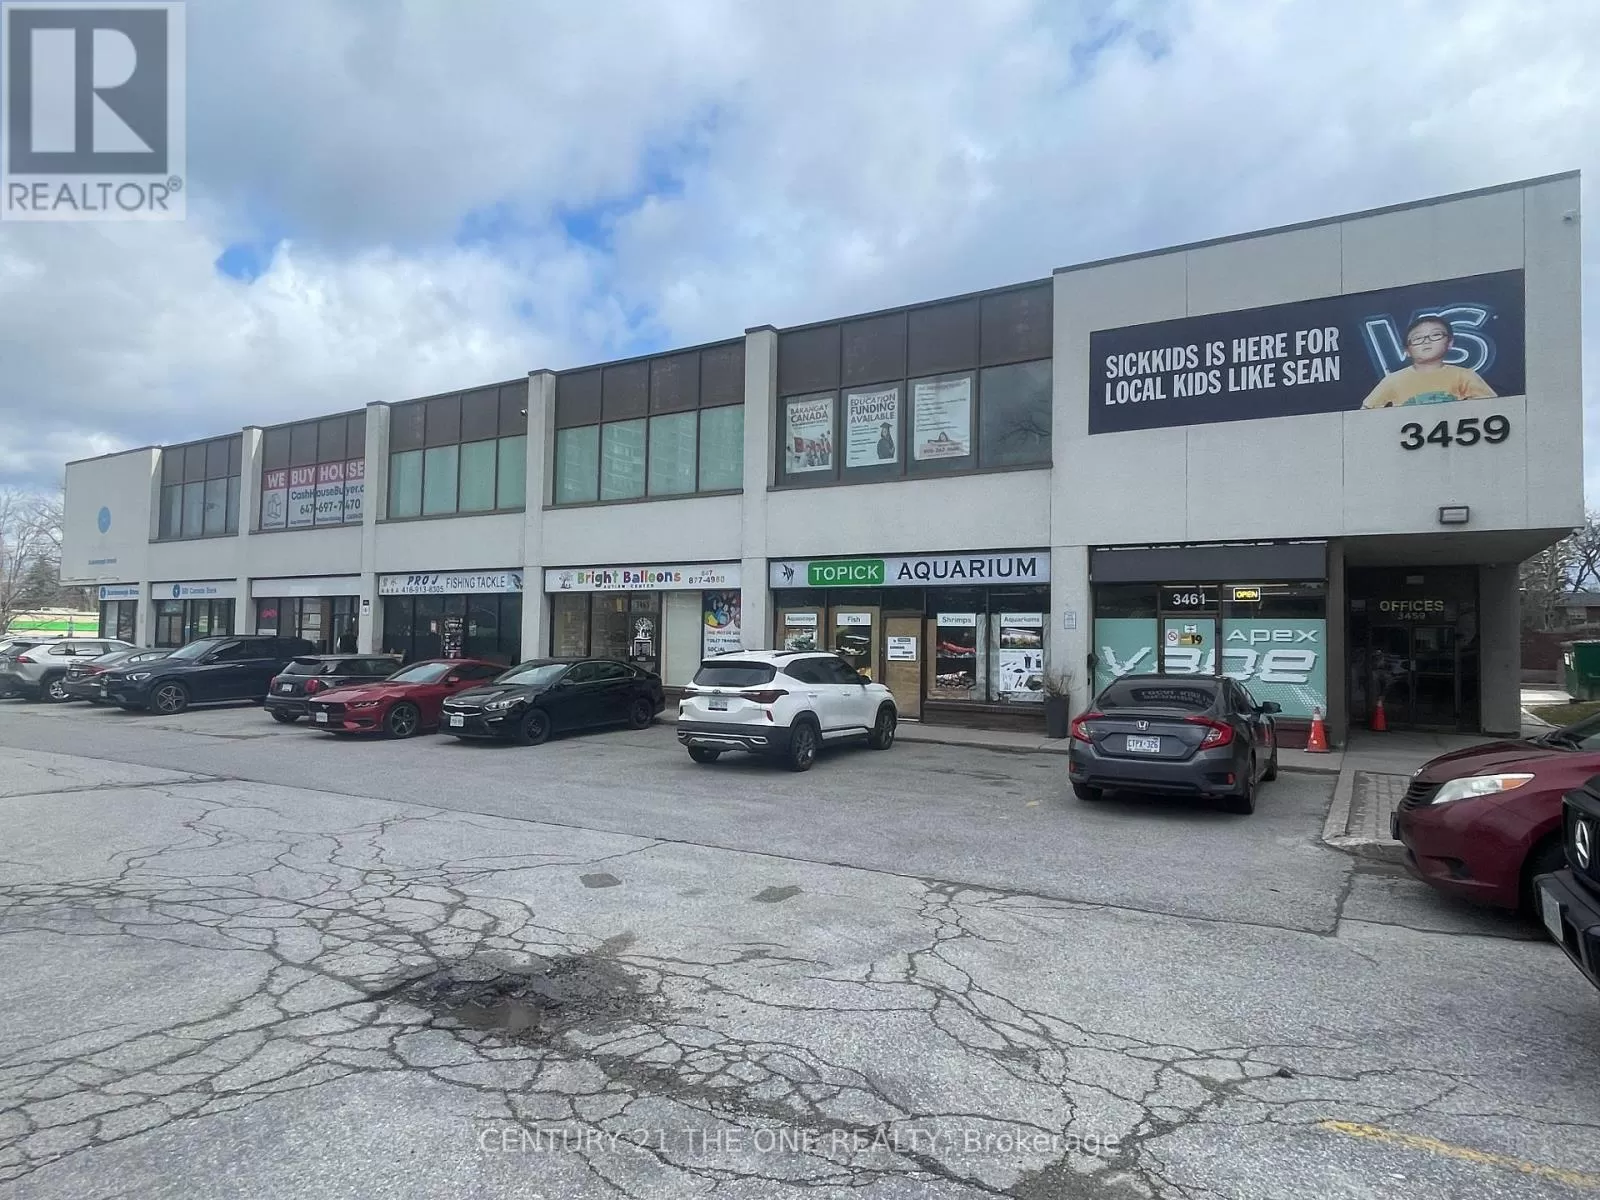 Offices for rent: 202a - 3459 Sheppard Avenue E, Toronto, Ontario M1T 3K5